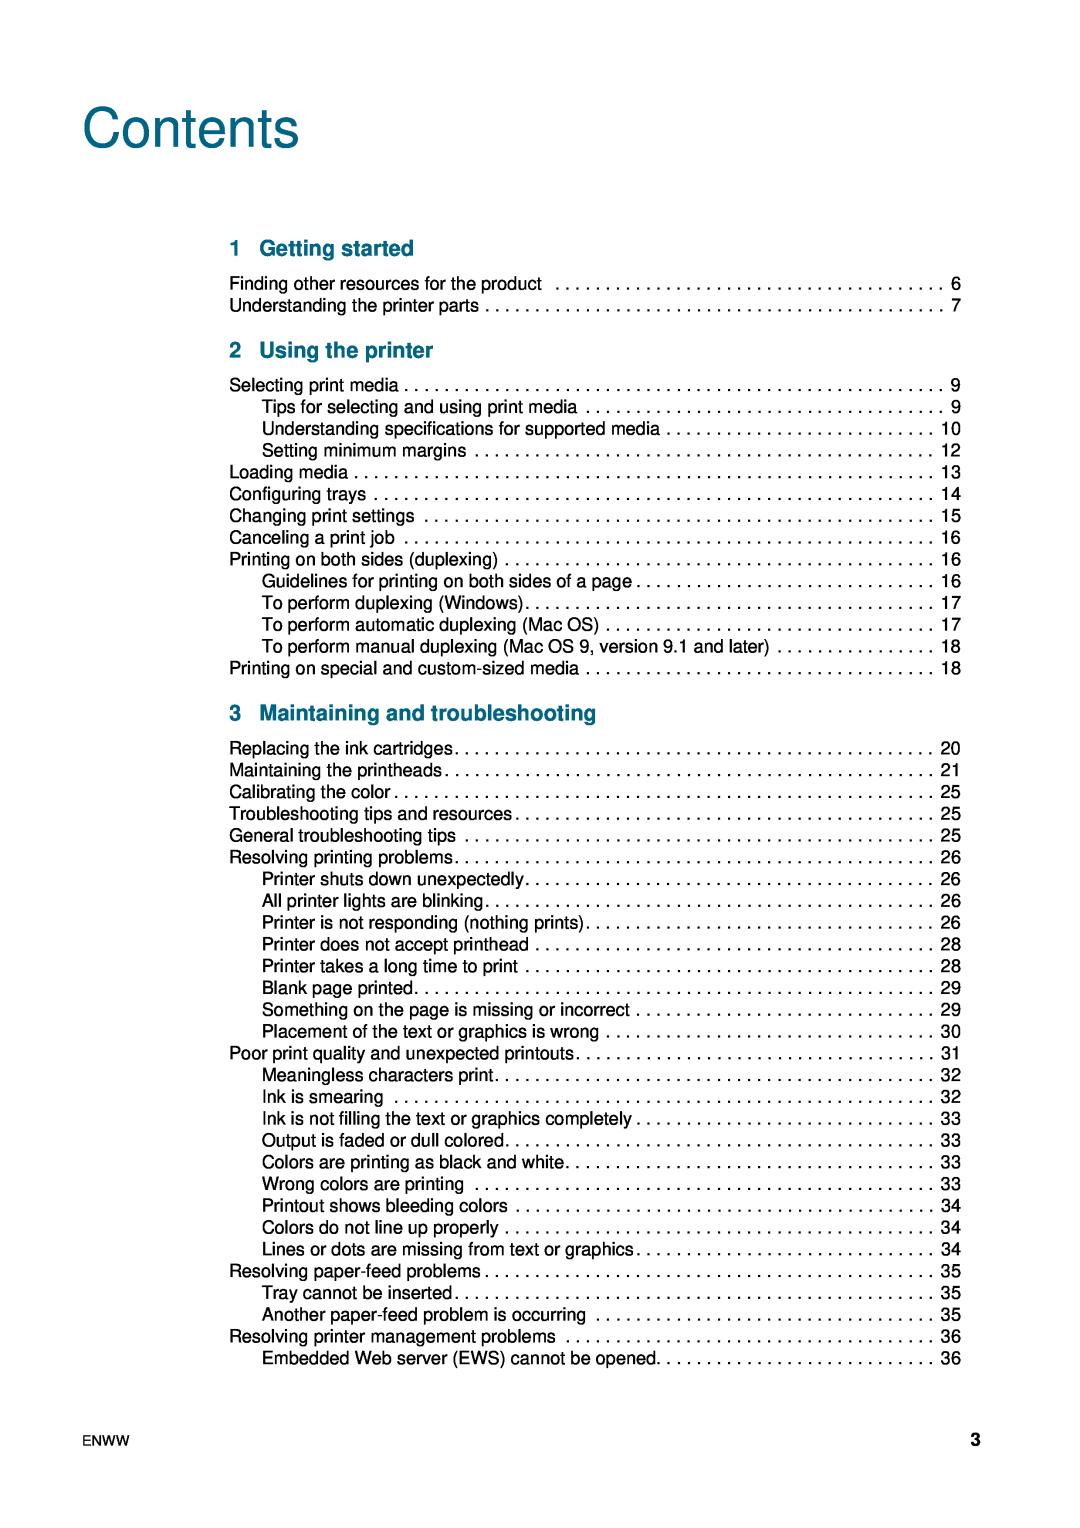 HP 1200 manual Contents, Getting started, Using the printer, Maintaining and troubleshooting 